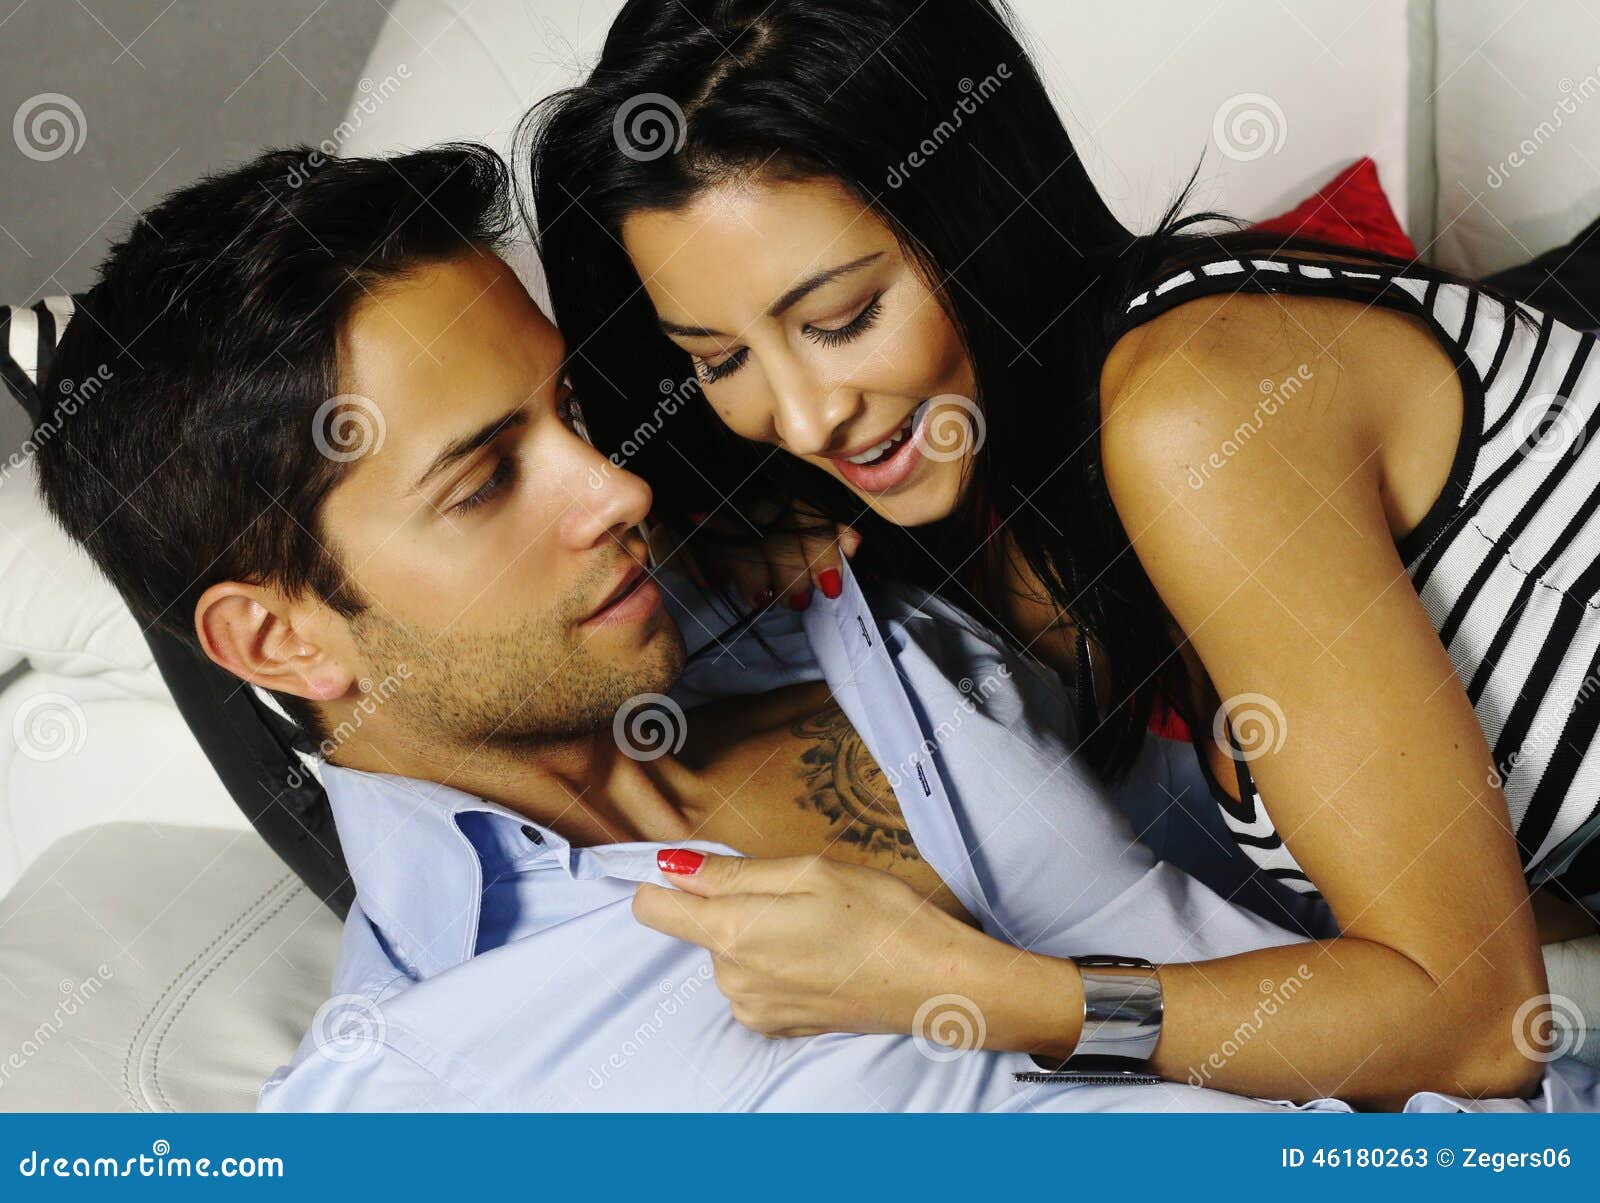 Woman Undressing a Brown Man Stock Image picture